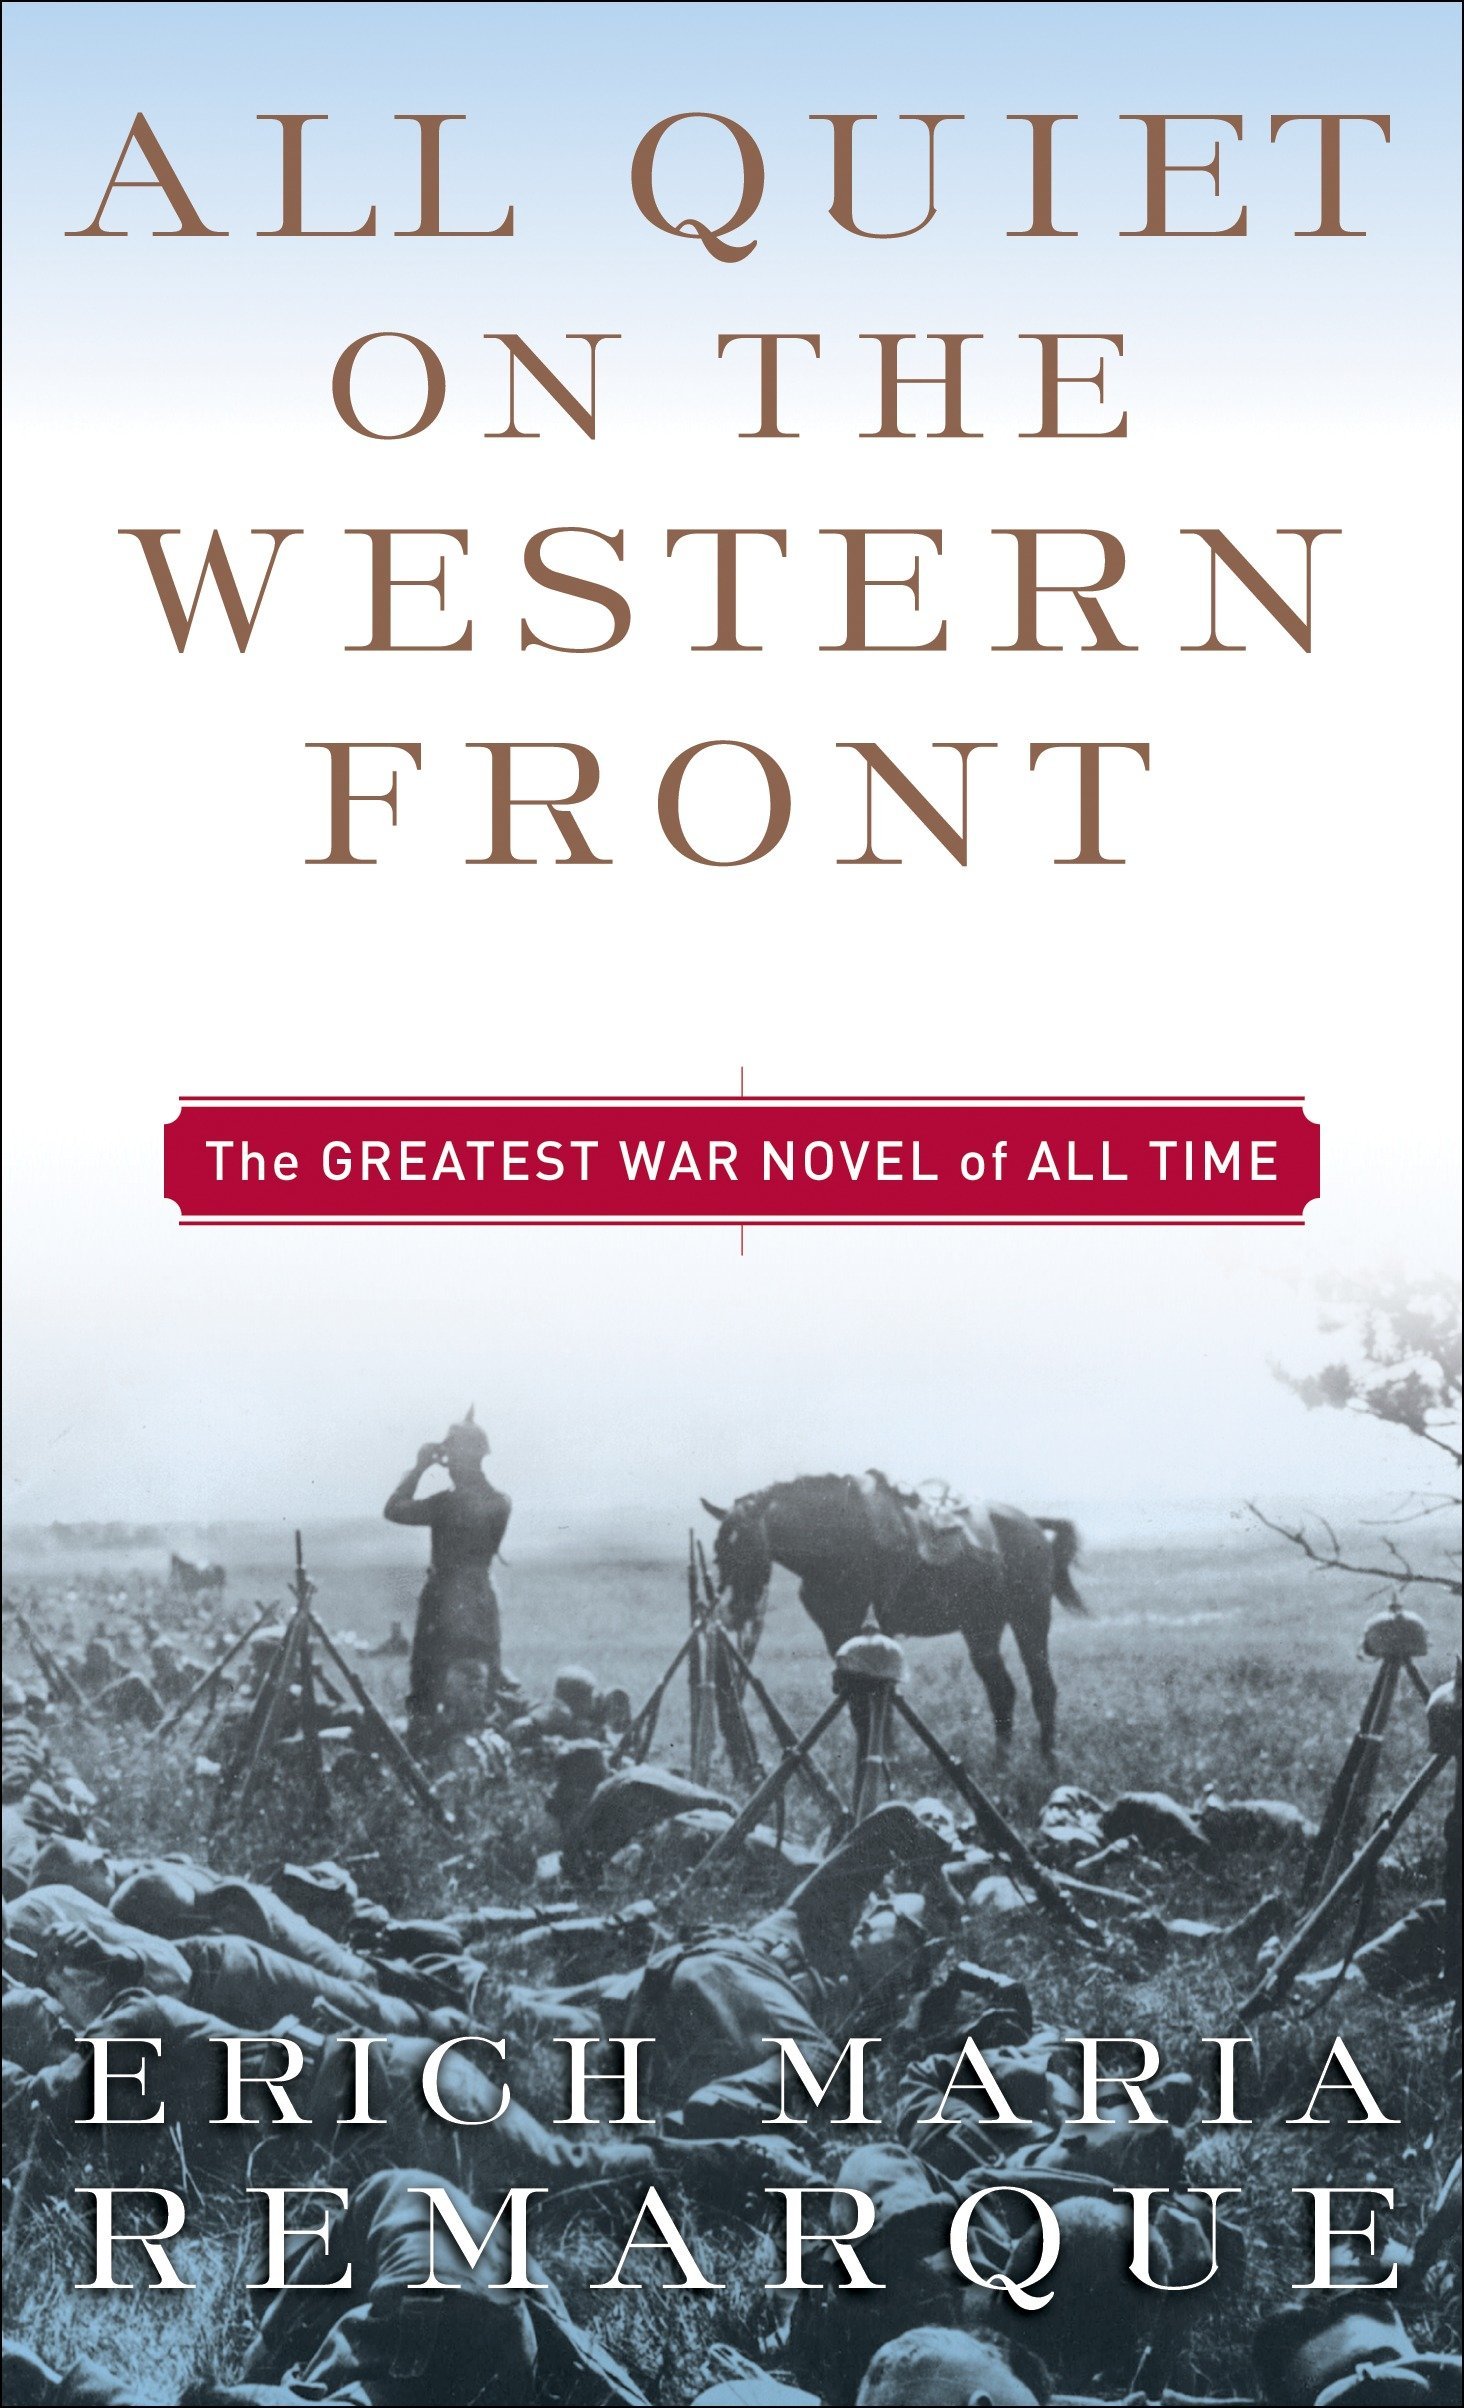 All Quiet on the Western Front book jacket